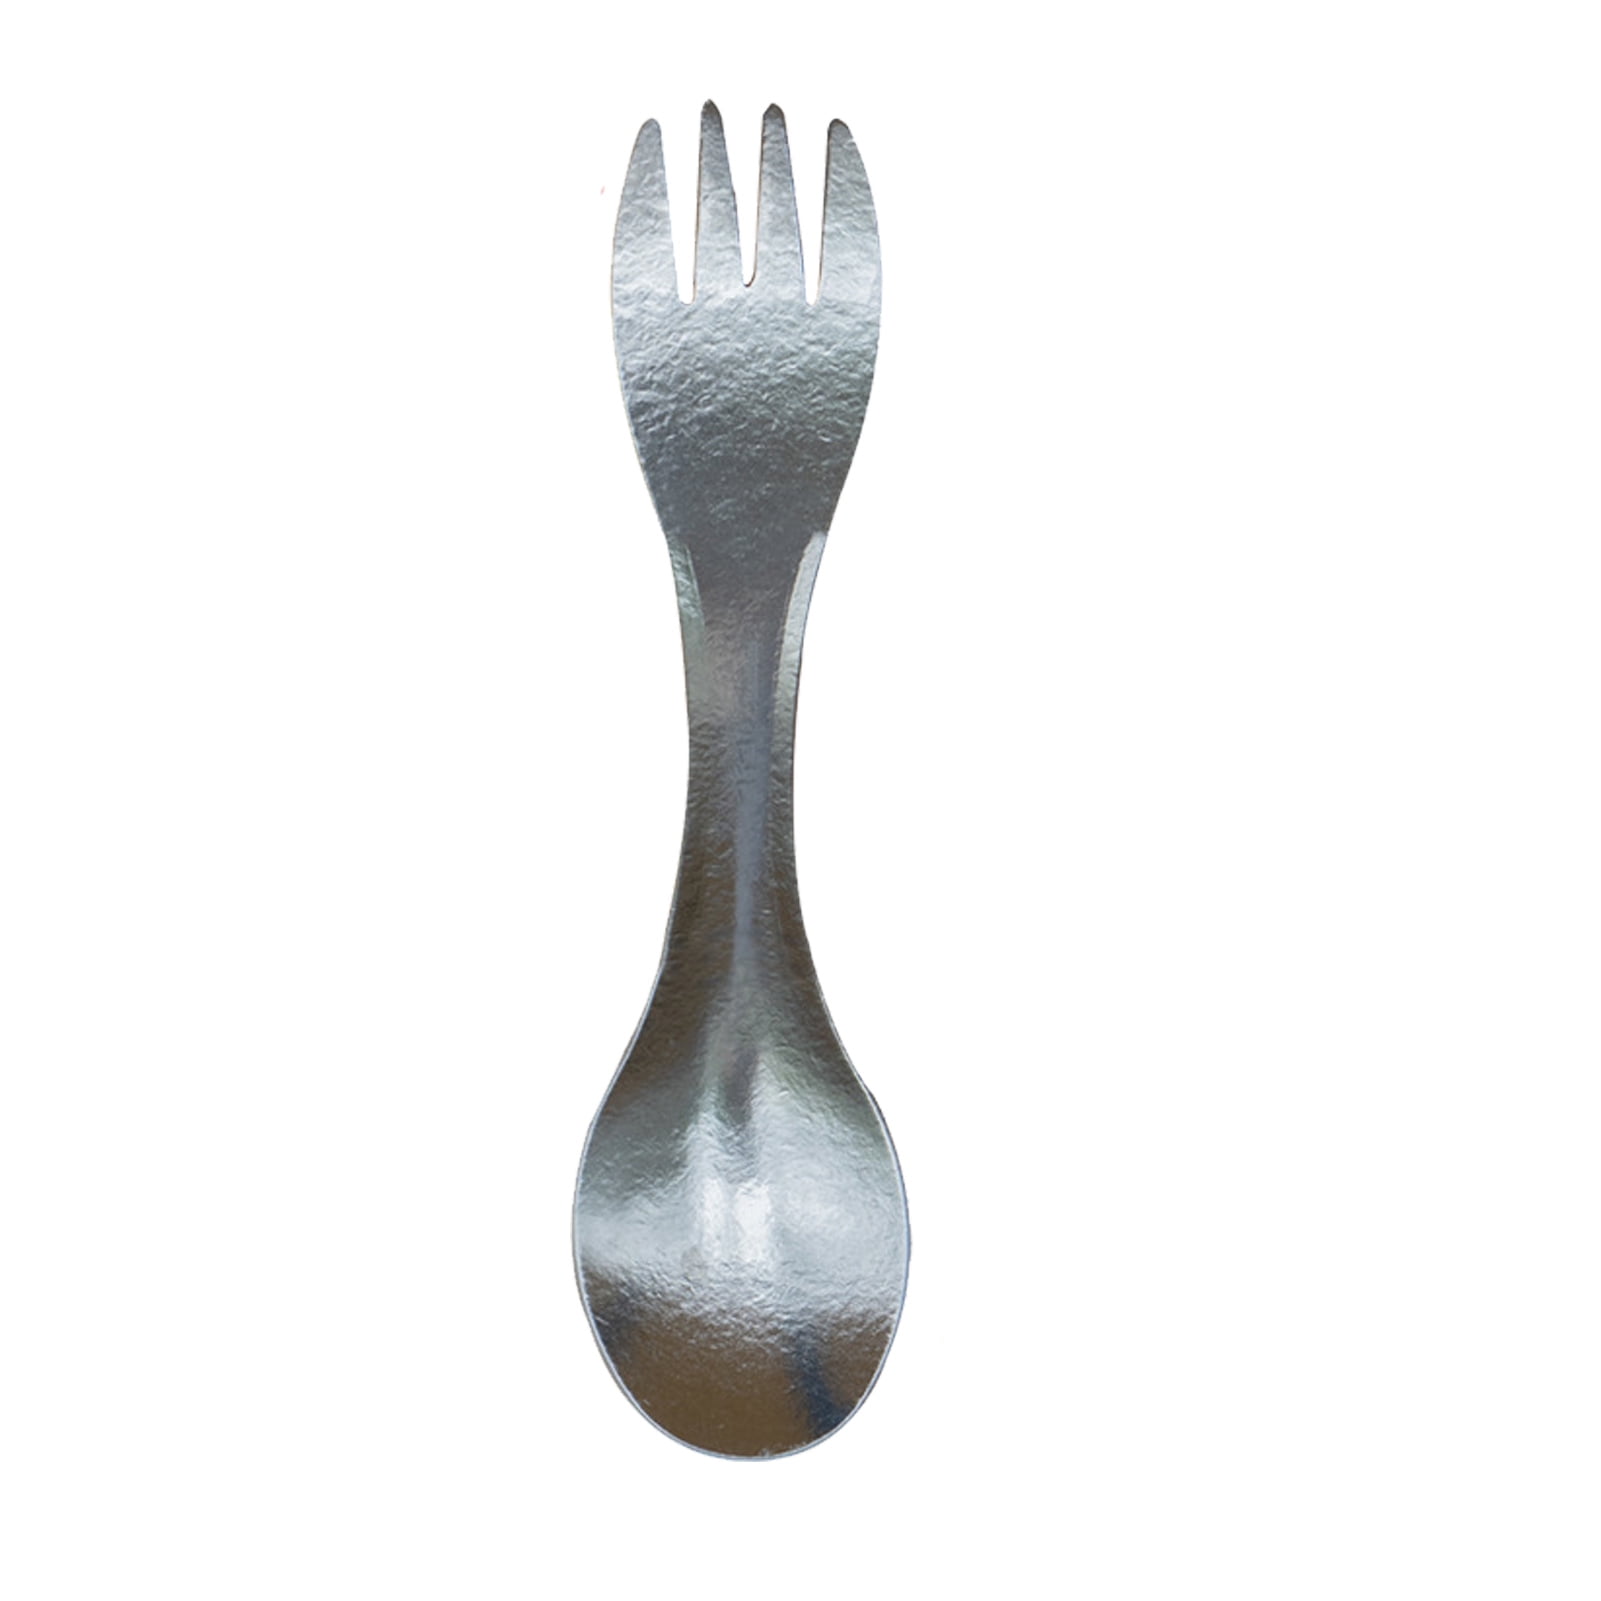 Details about   Bright Colorful Titanium Spork for Outdoor Camping Light Weight Titanium Spoon 